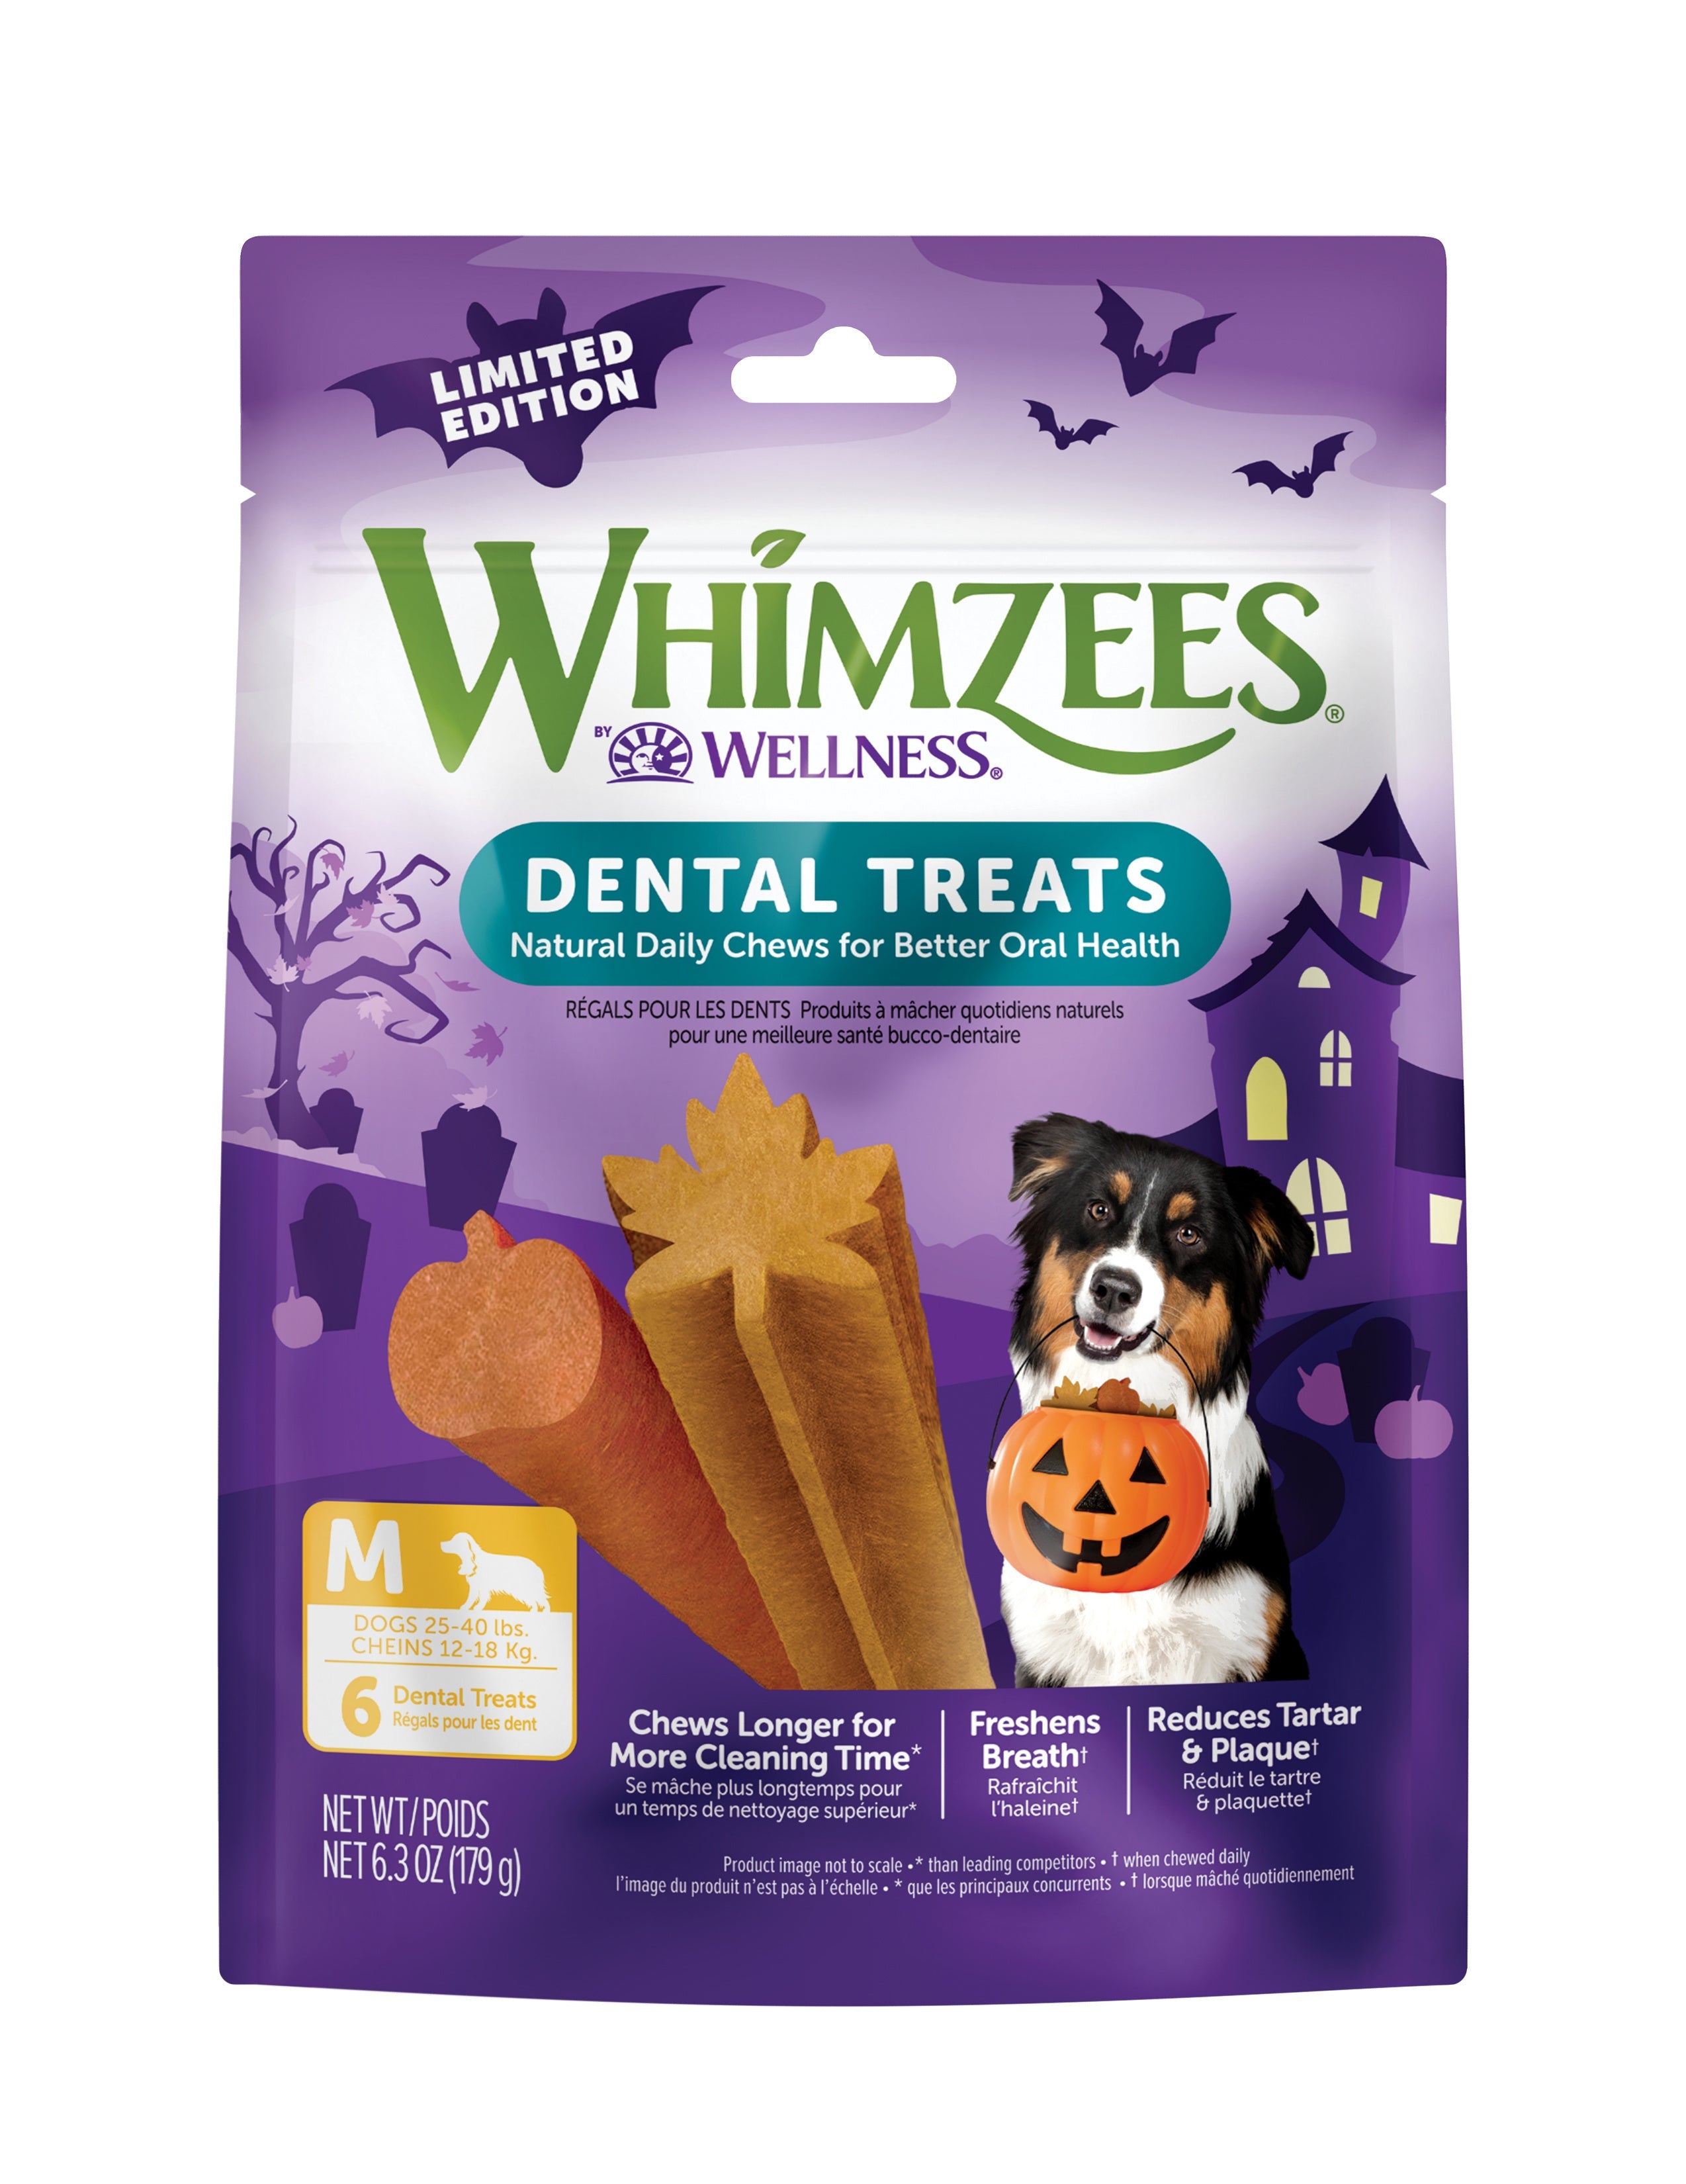 WHIMZEES by Wellness Halloween Natural Grain Free Dental Chews for Dogs, Medium Breed, 6 count